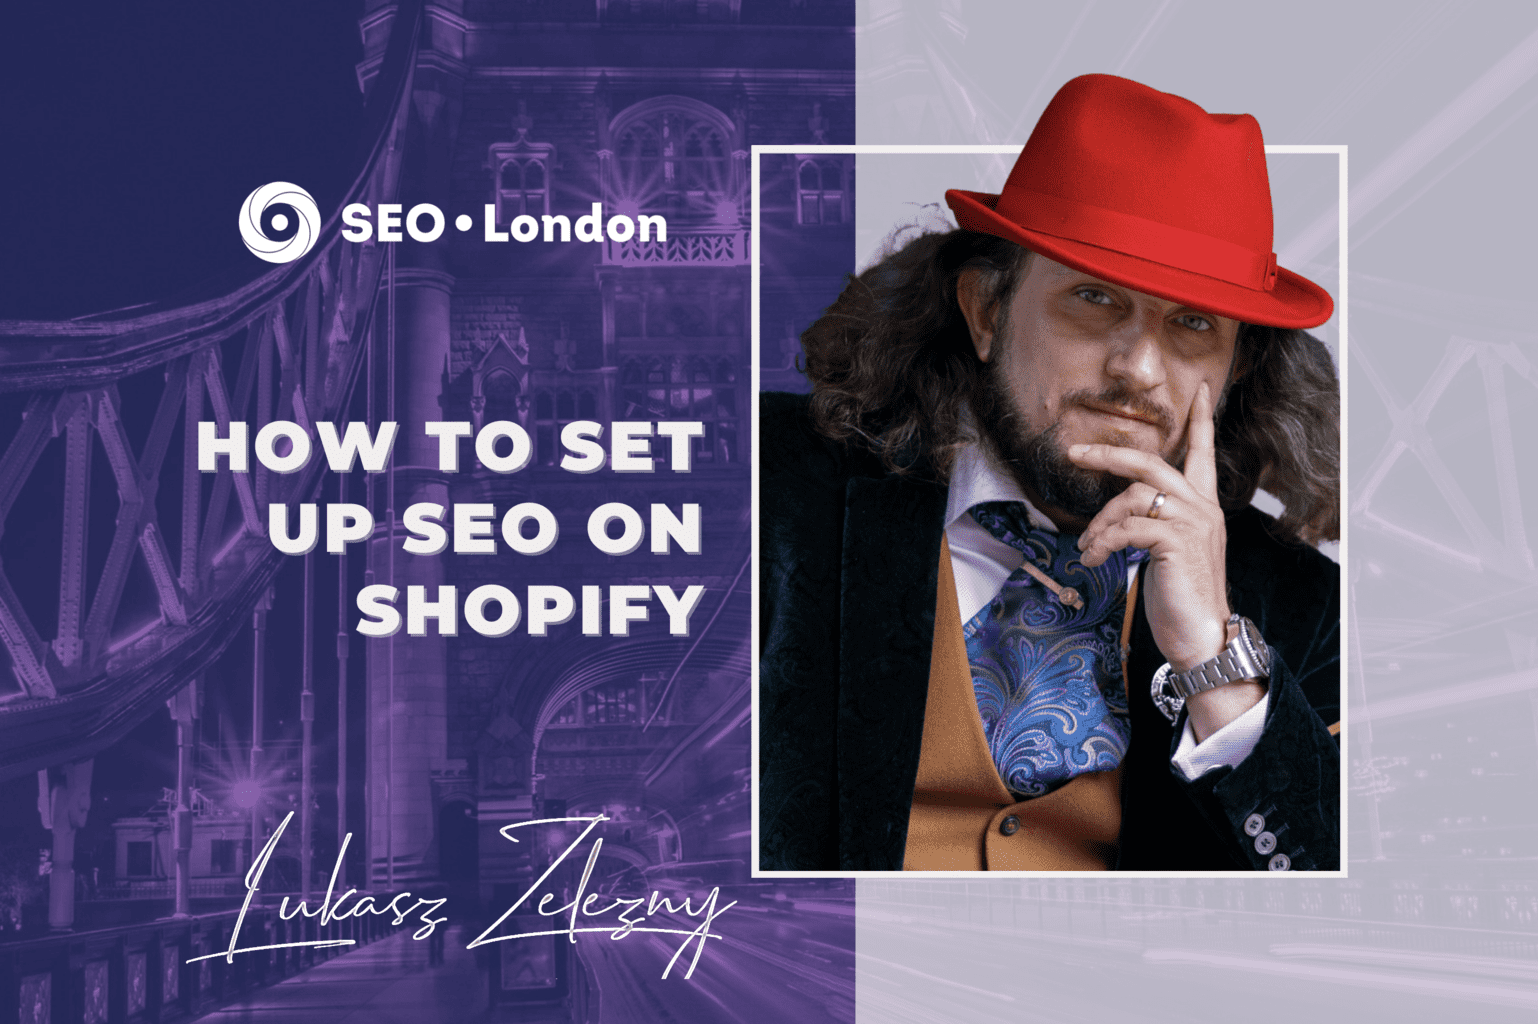 How To Set Up SEO On Shopify